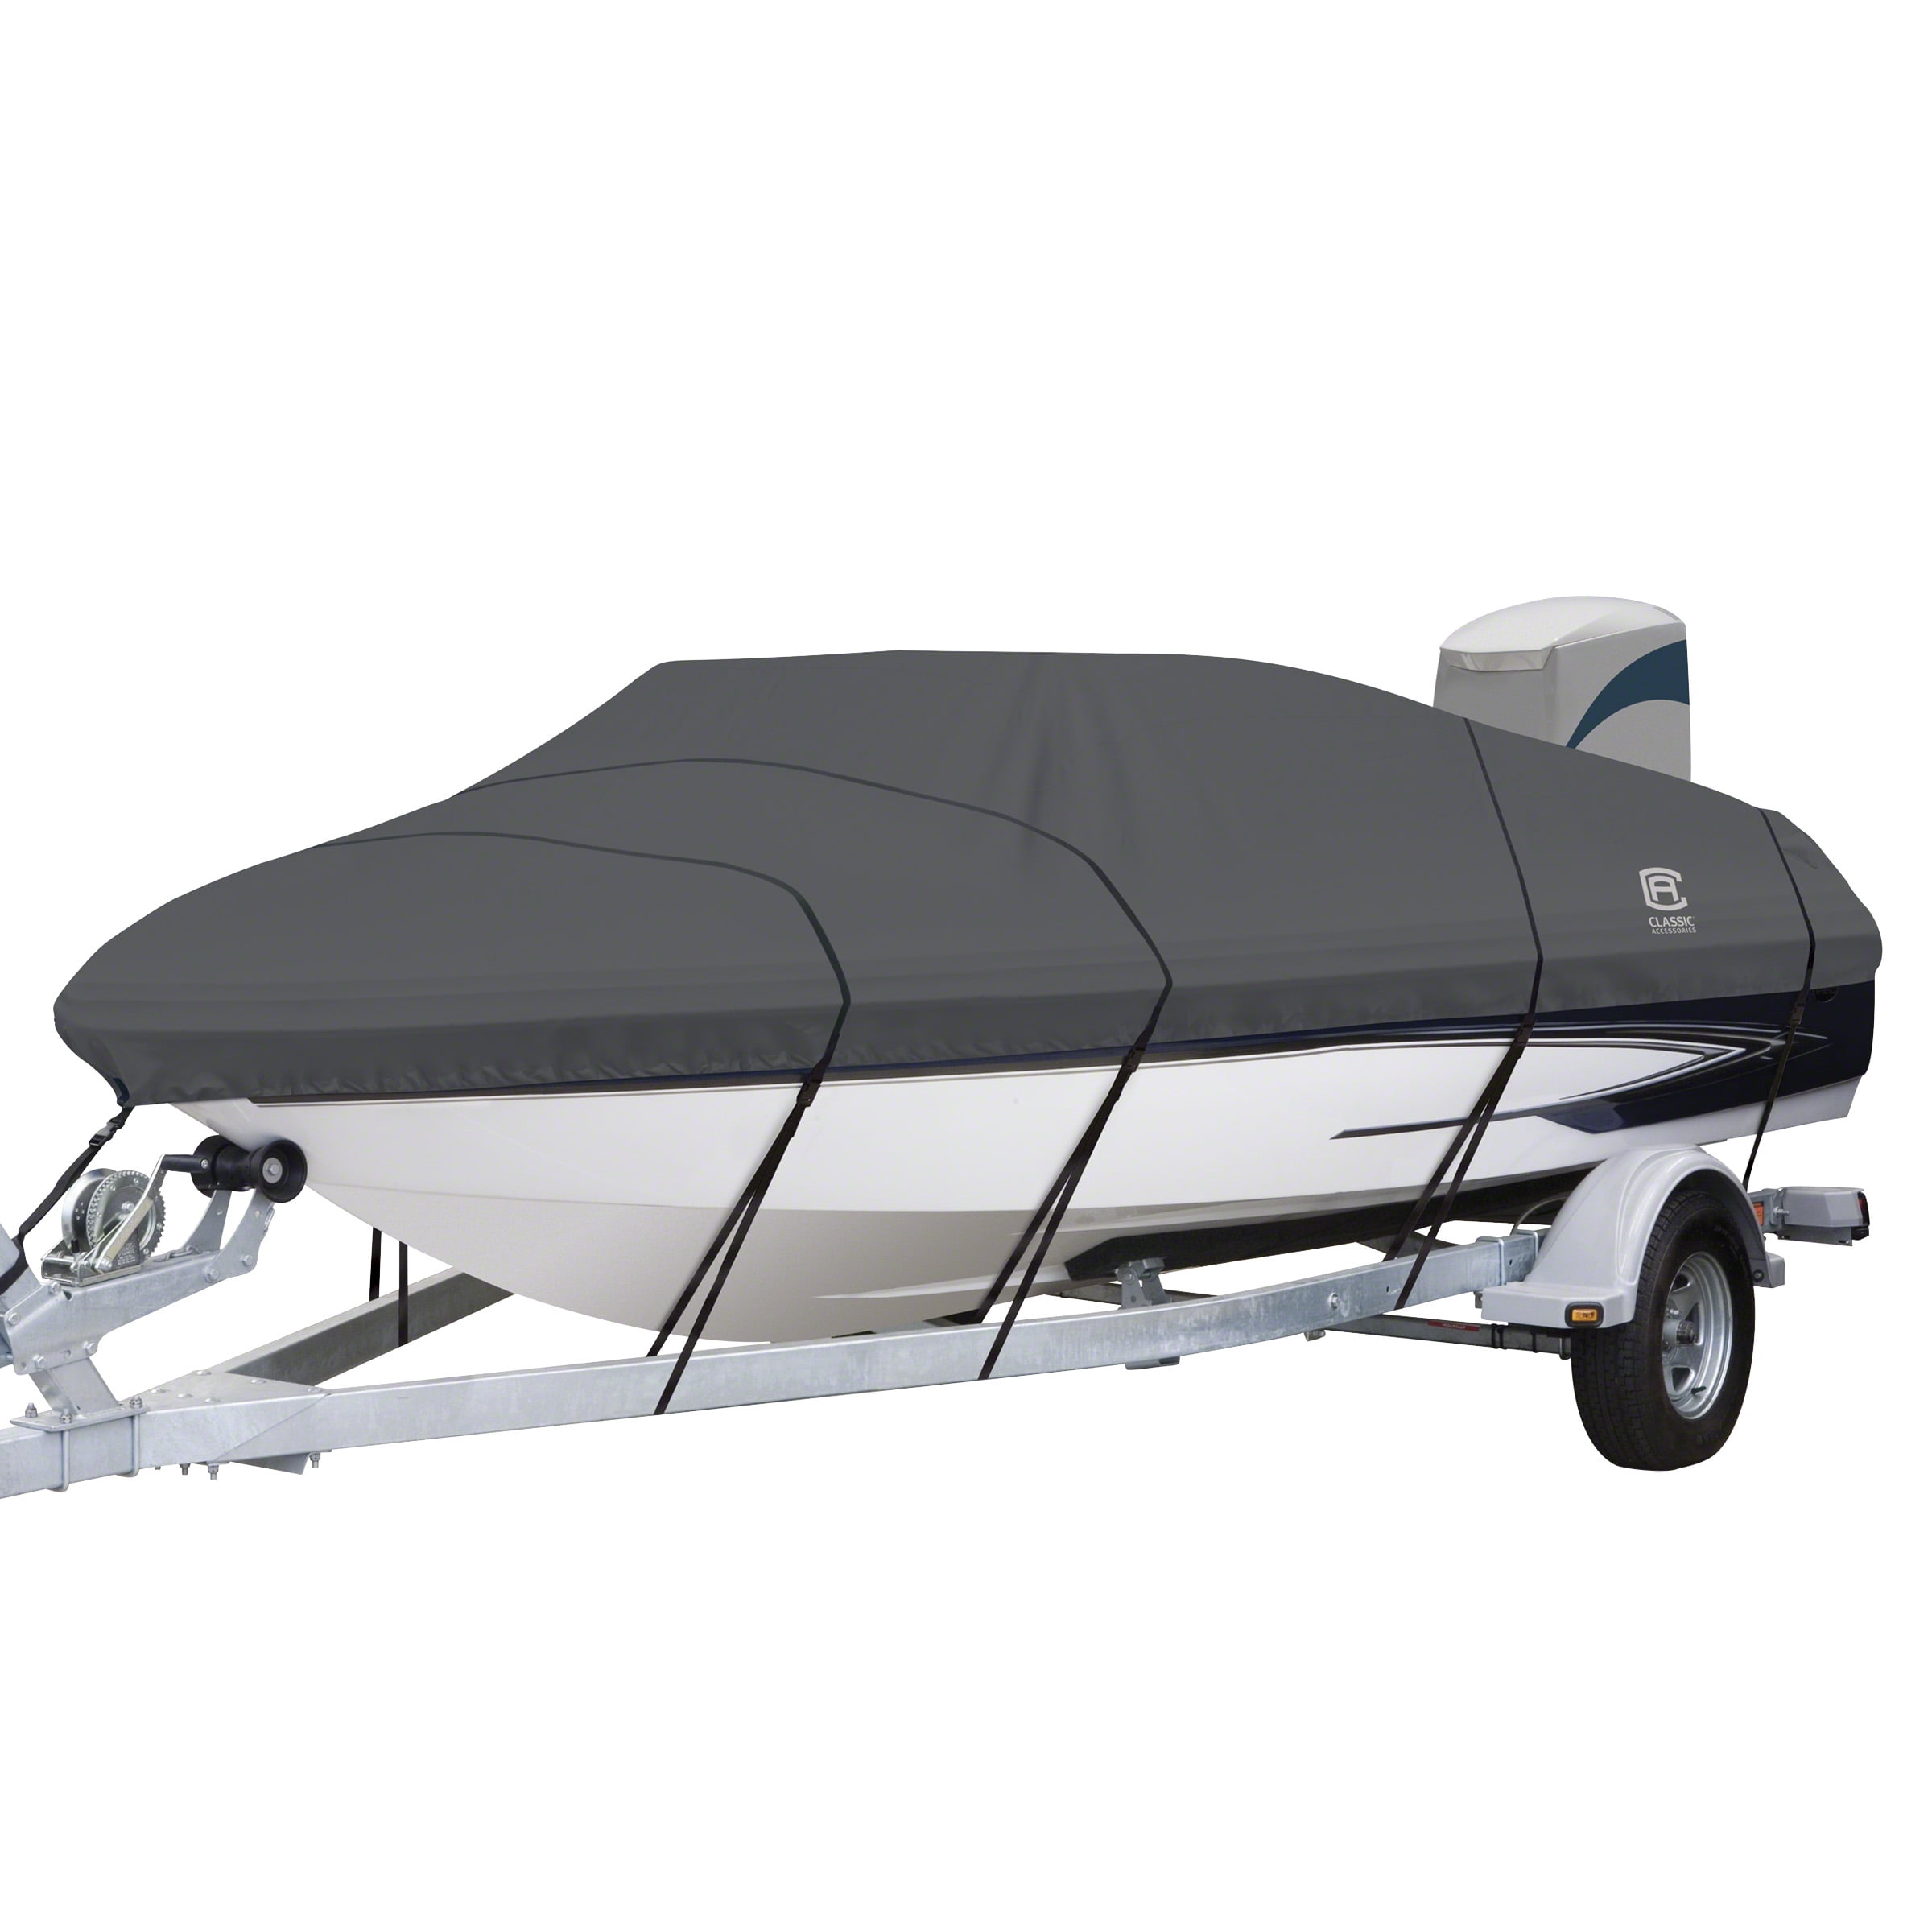 Classic Accessories StormPro HeavyDuty Boat Cover, Fits boats 17 ft 19 ft long x 102 in wide